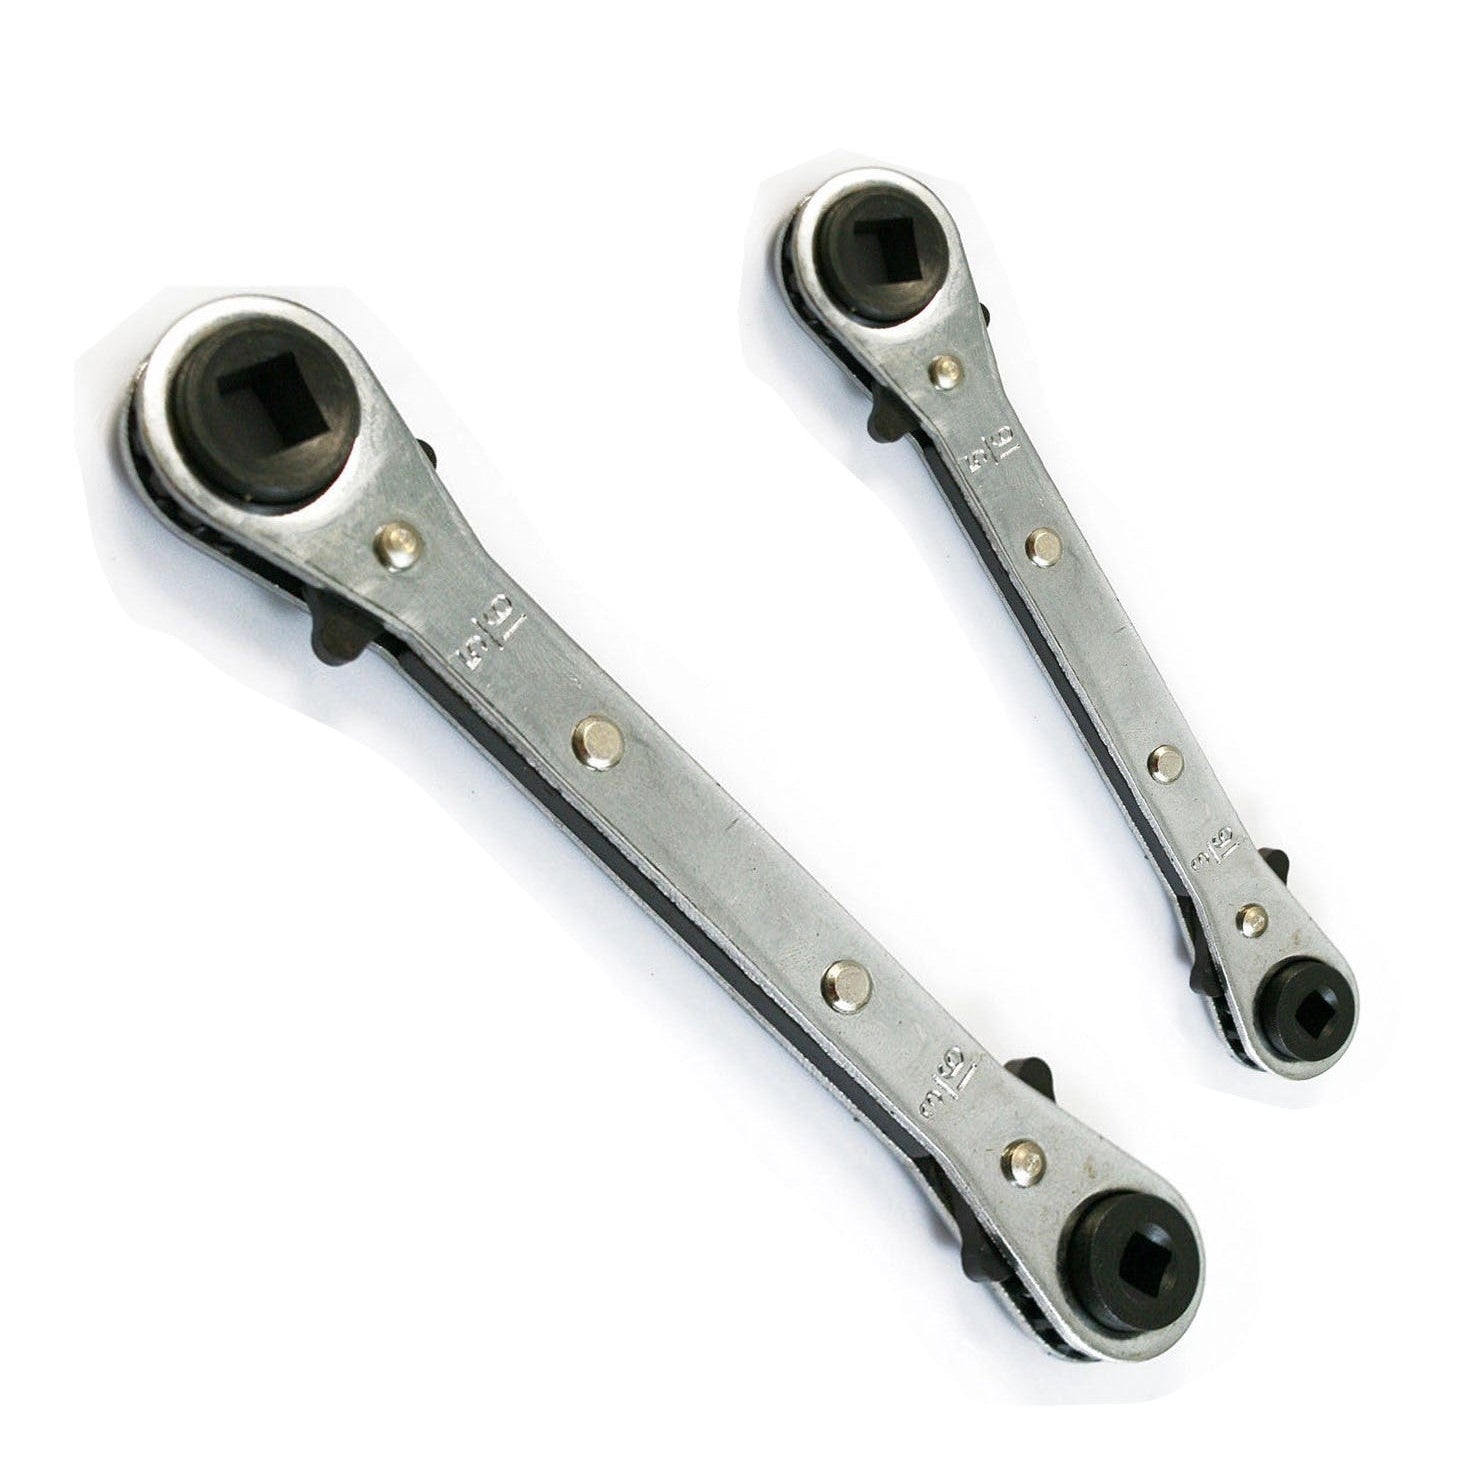 WRENCHES—Ratchet Style Square and Hex 4-way Spanners